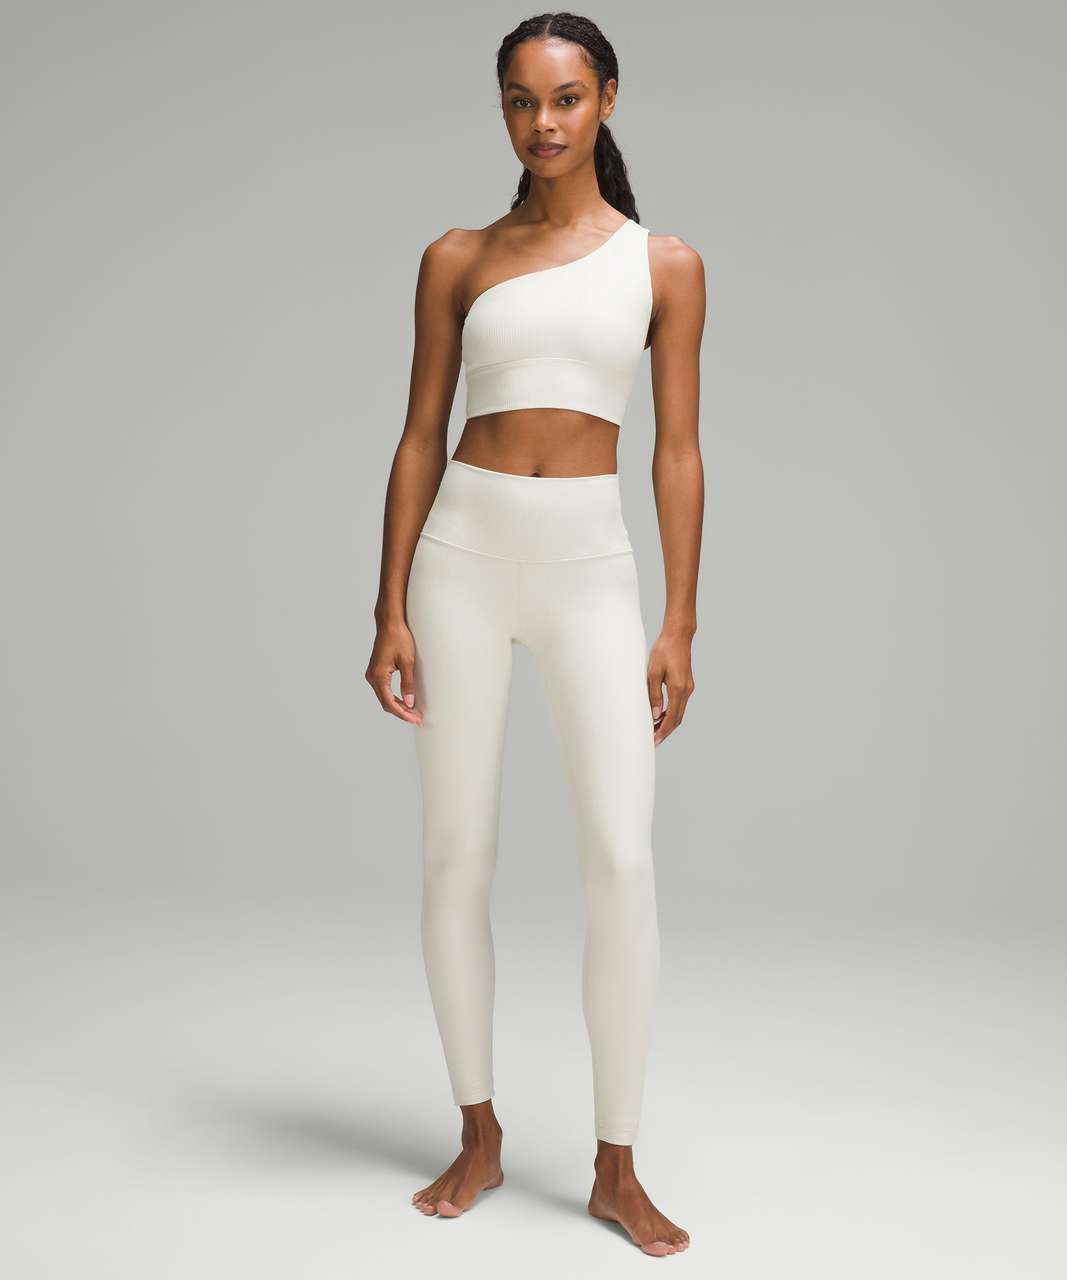 NWOT - ! SOLD OUT ! Lululemon Align Pant 28 White, SIZE: 2, 4, 6, 8, 10